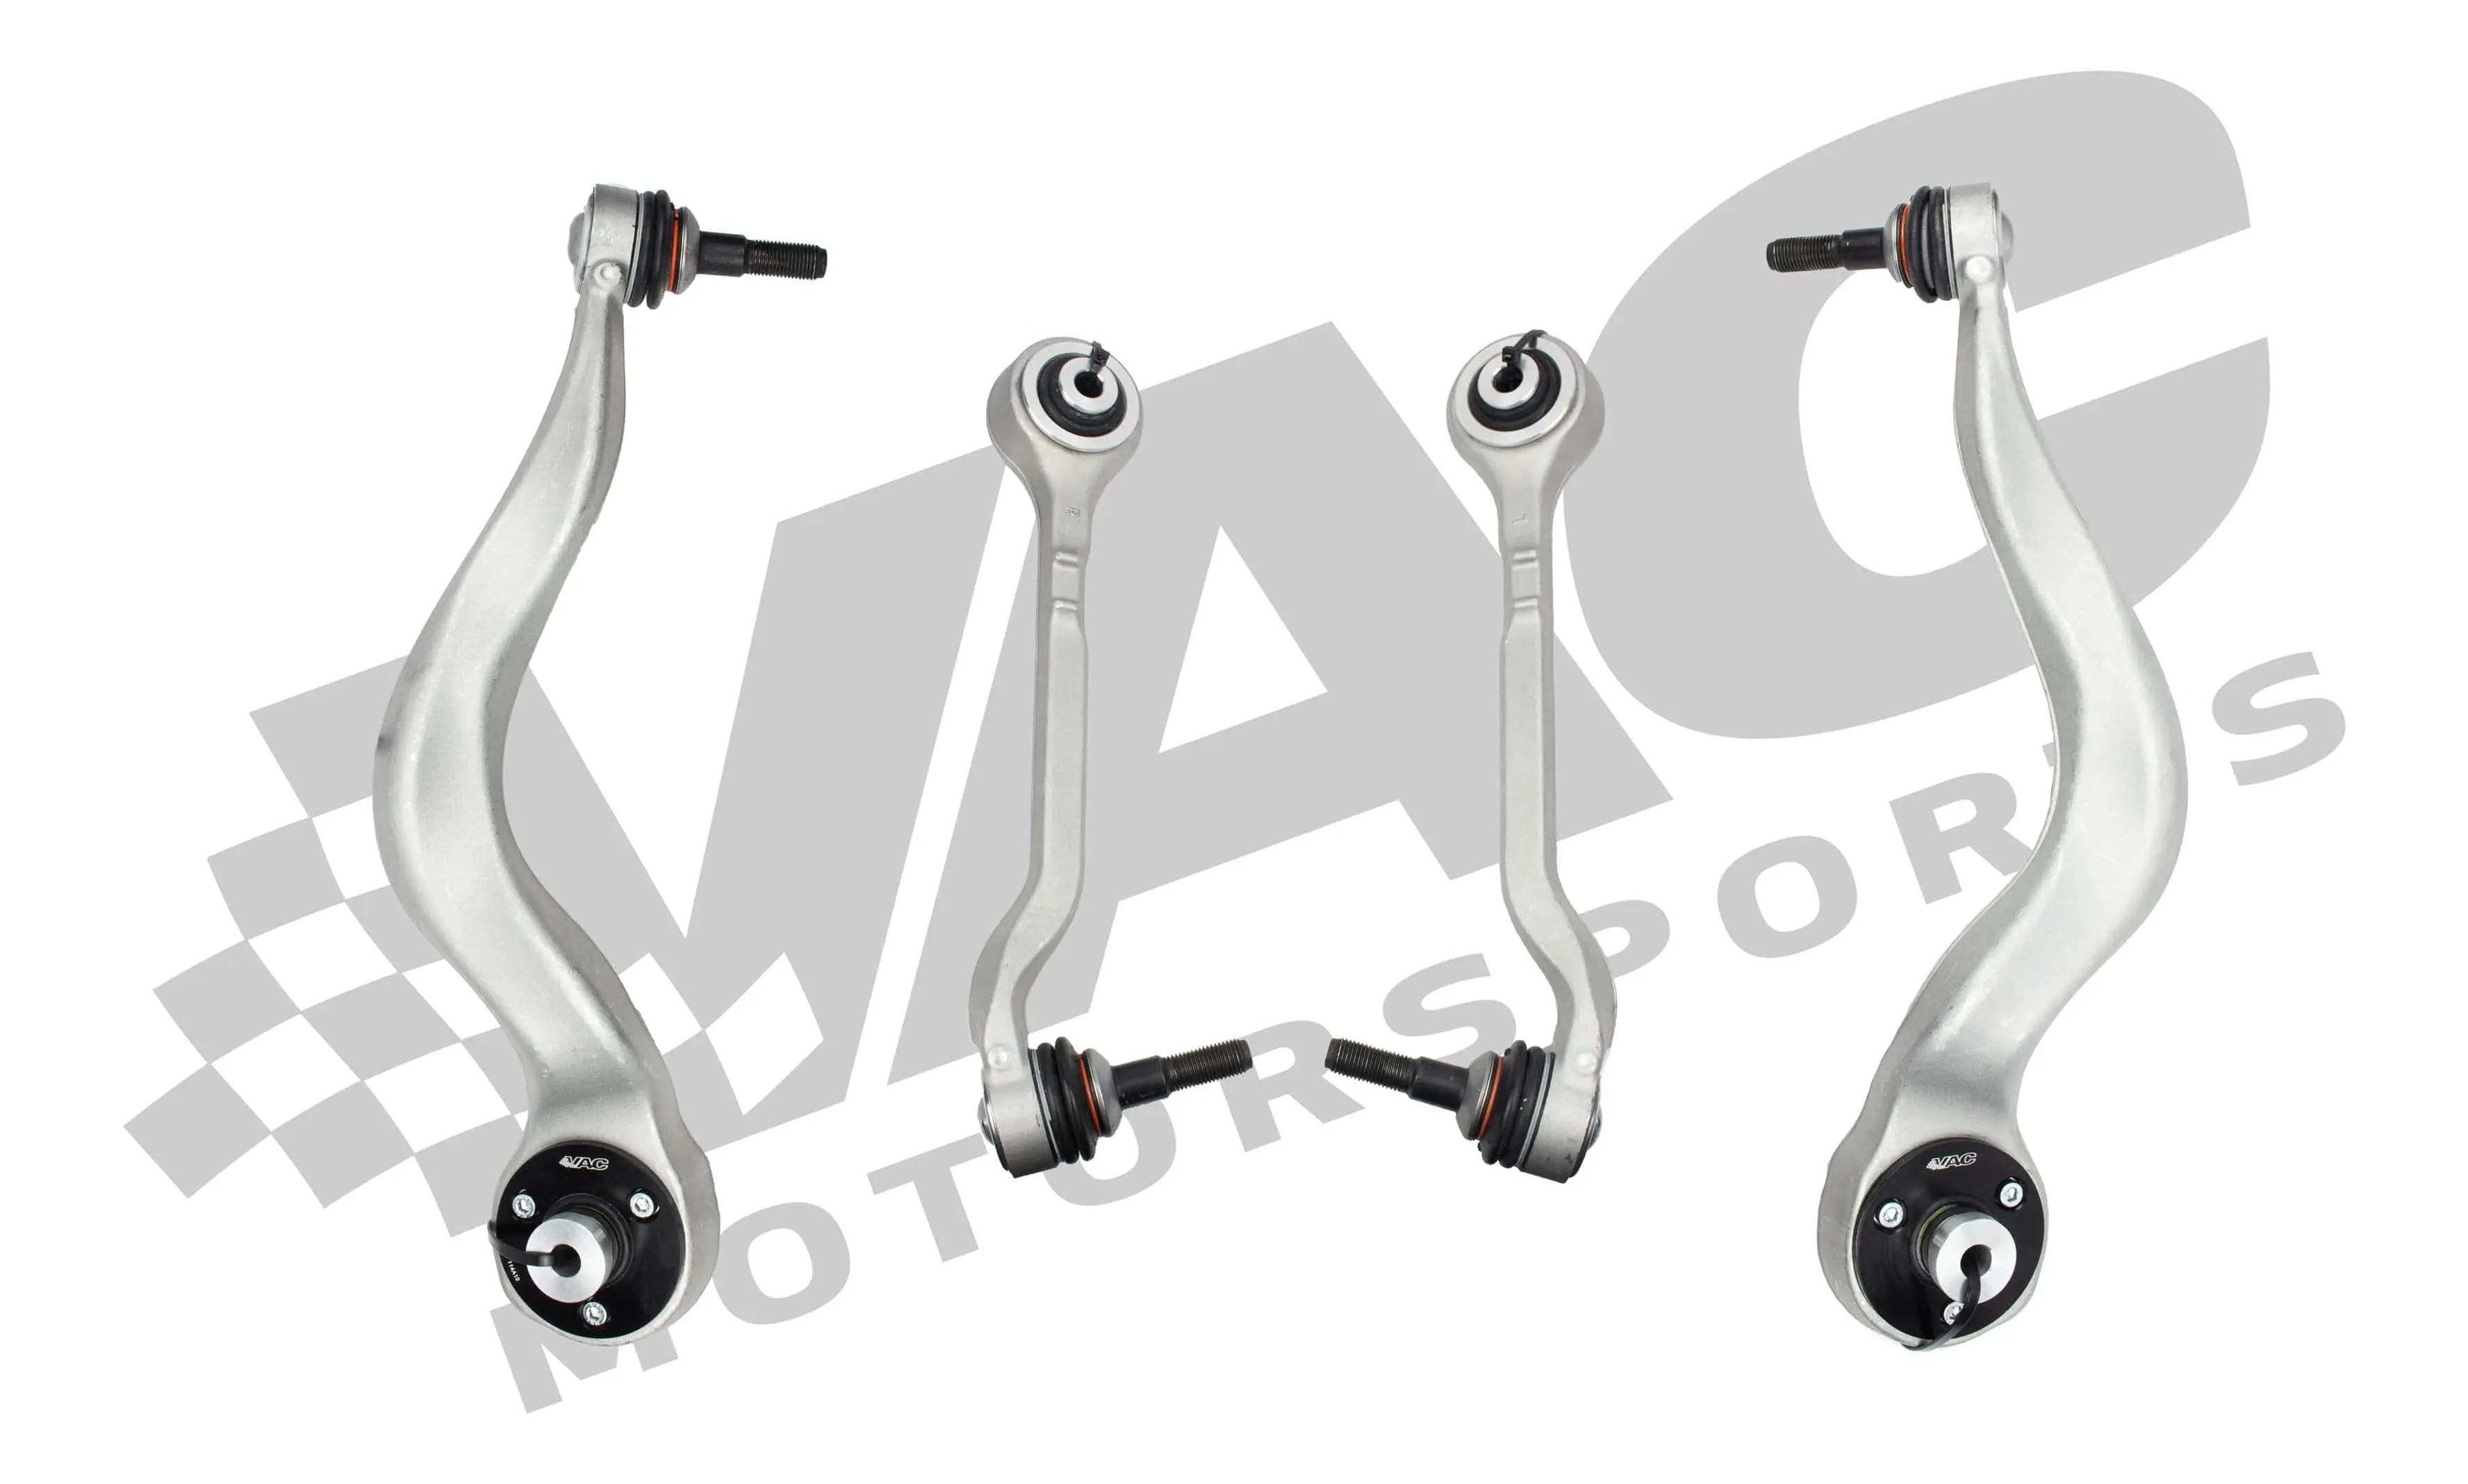 VAC - F3X FRONT CONTROL ARM SET (L&R) XDRIVE ONLY (Upper & Lower) (Monoballs) - Lower Control Arm Only